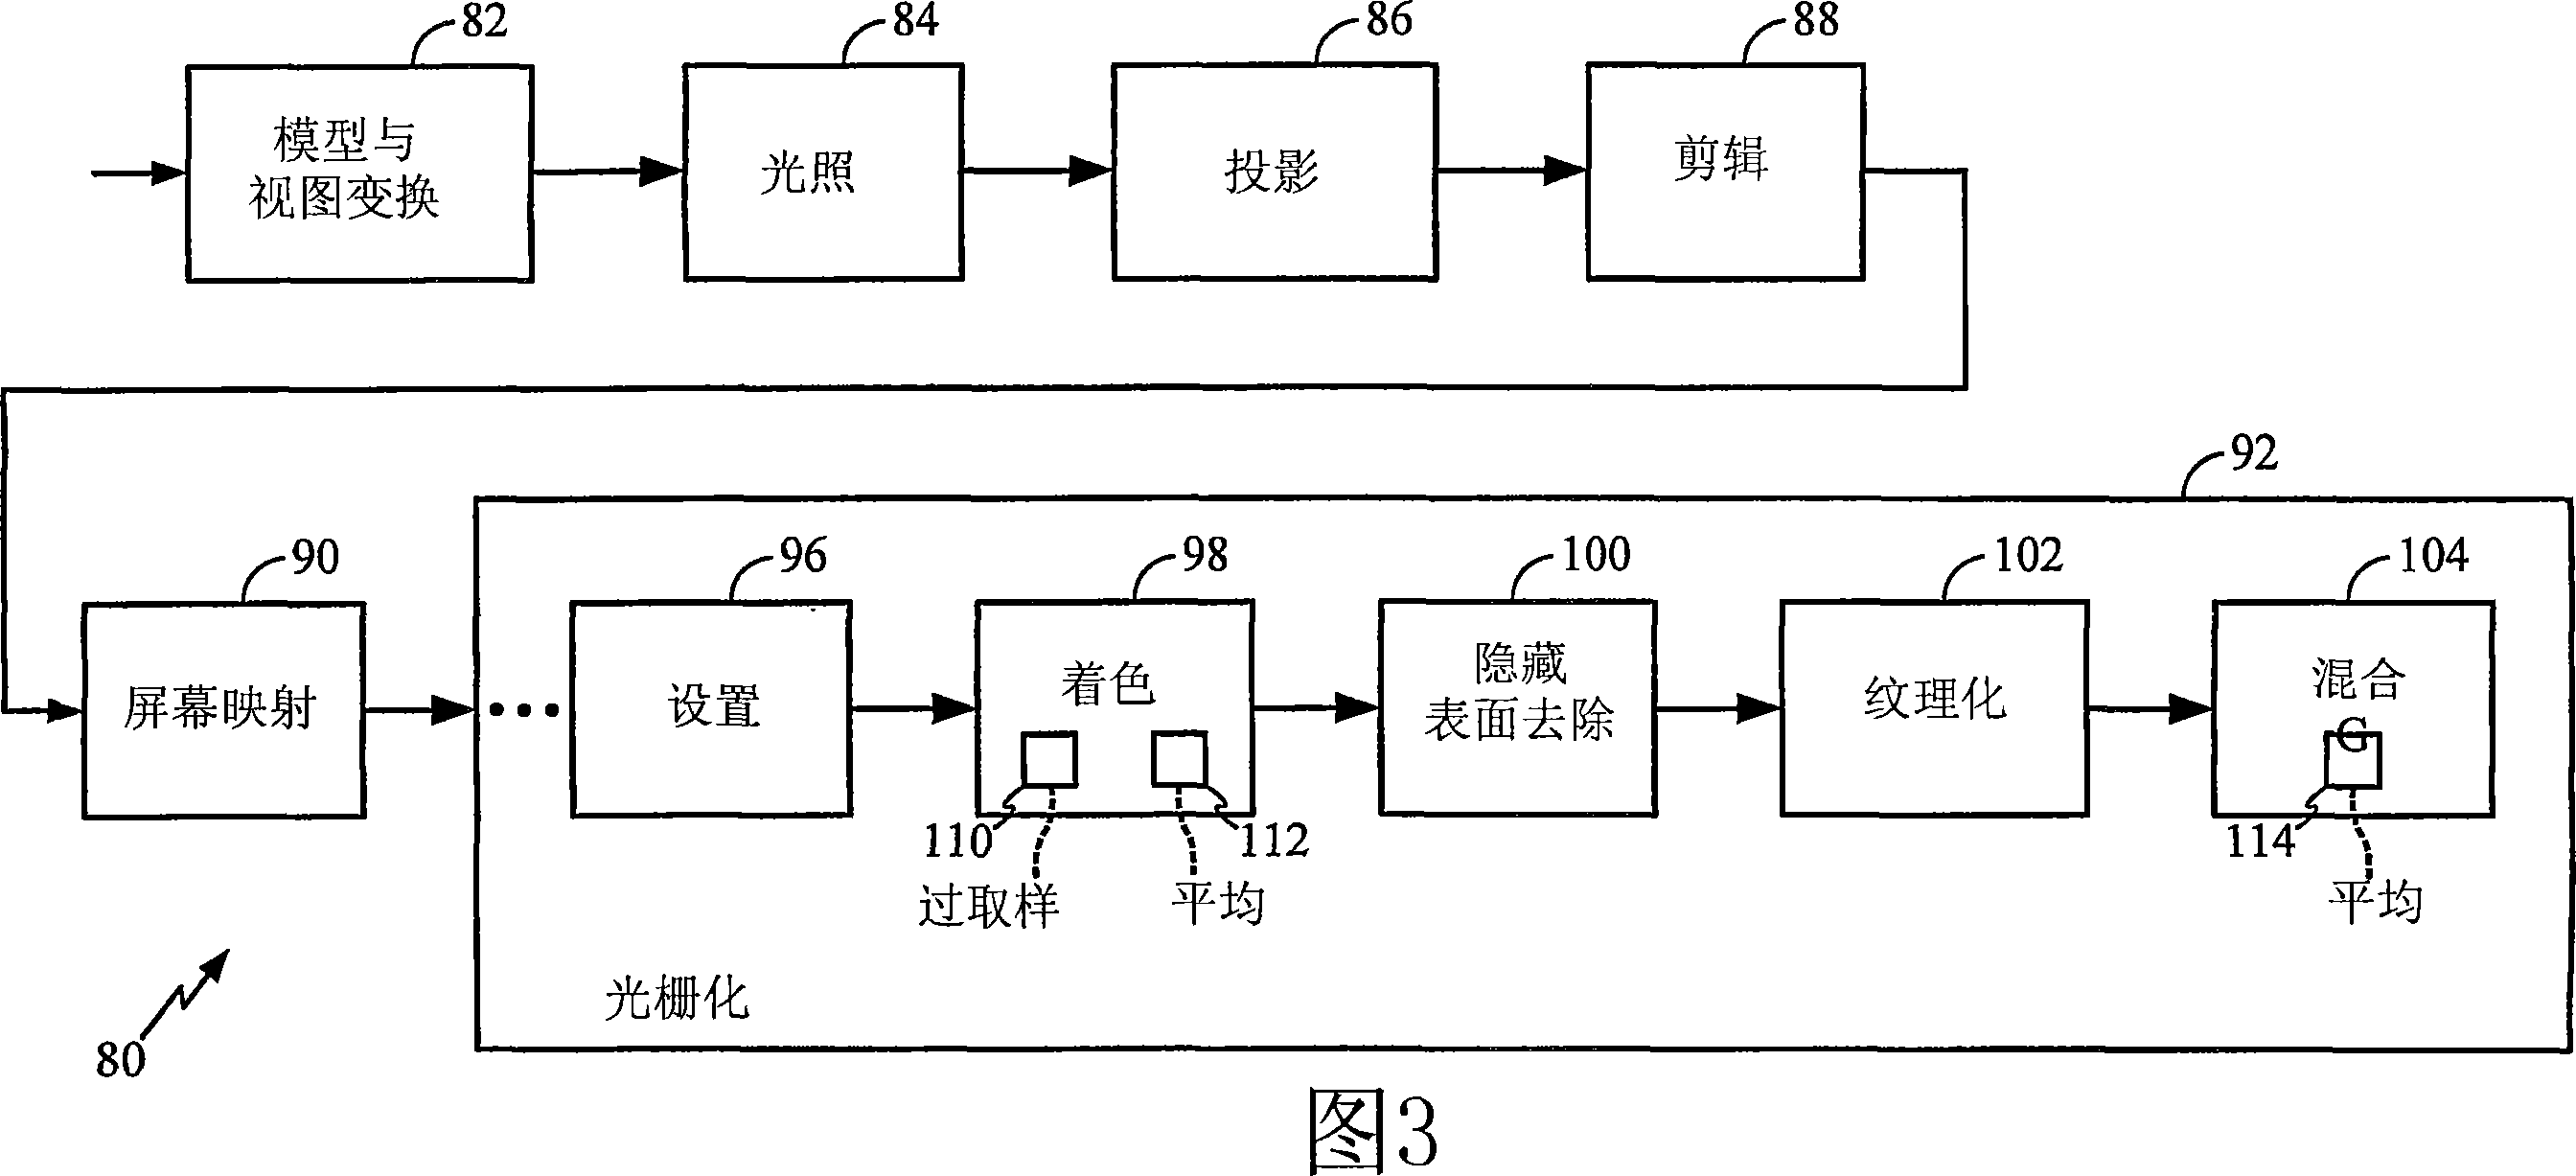 Flexible antialiasing in embedded devices